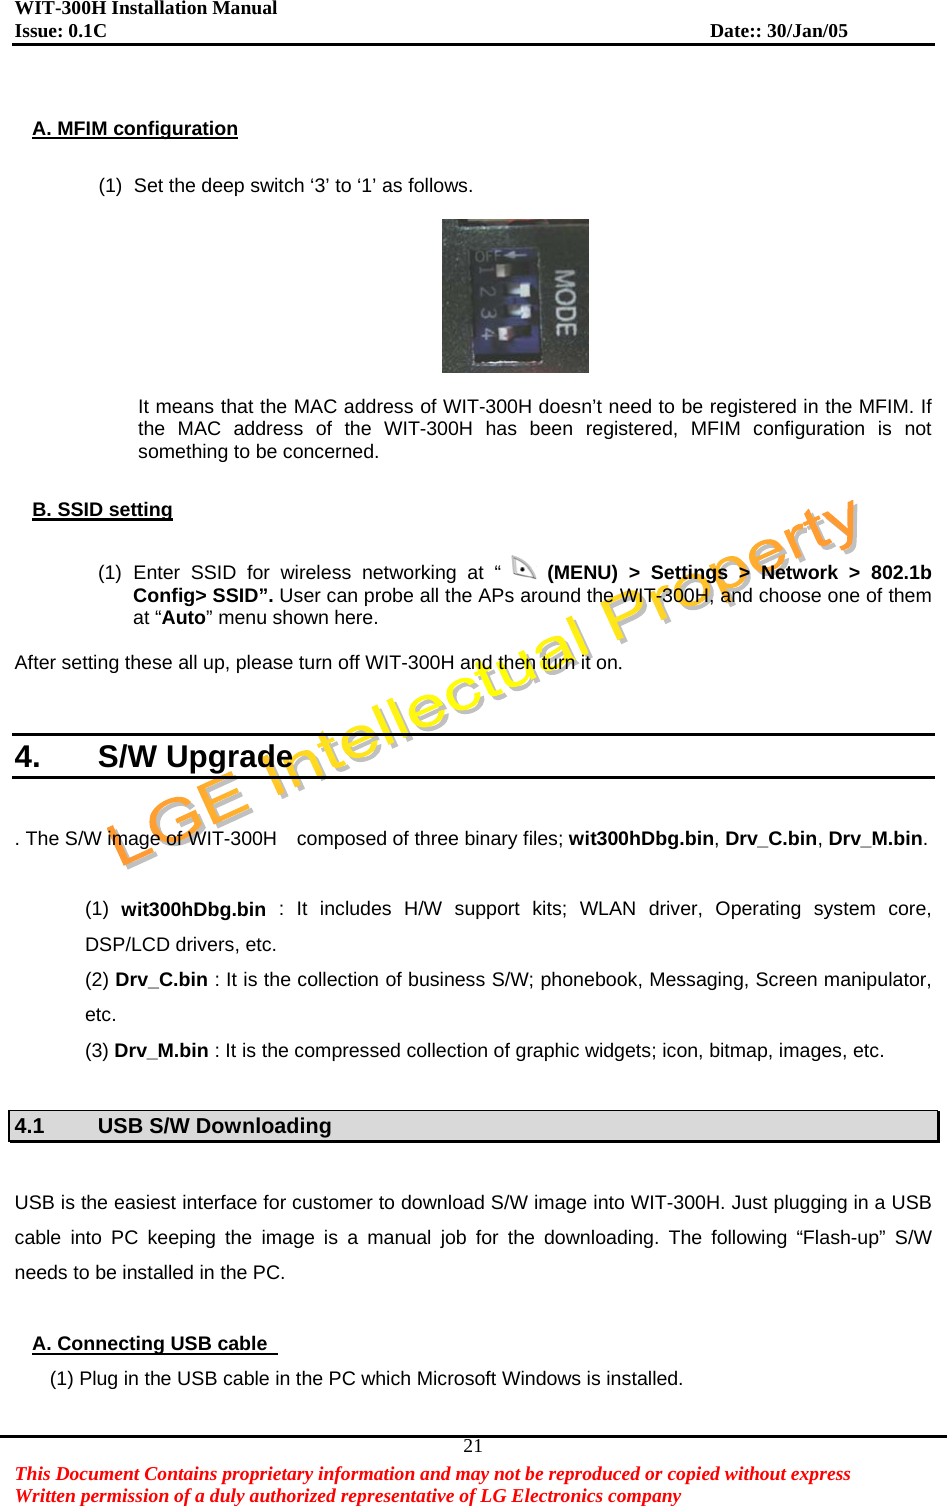 WIT-300H Installation Manual Issue: 0.1C              Date:: 30/Jan/05   This Document Contains proprietary information and may not be reproduced or copied without express   Written permission of a duly authorized representative of LG Electronics company 21 A. MFIM configuration  (1)  Set the deep switch ‘3’ to ‘1’ as follows.    It means that the MAC address of WIT-300H doesn’t need to be registered in the MFIM. If the MAC address of the WIT-300H has been registered, MFIM configuration is not something to be concerned.  B. SSID setting  (1) Enter SSID for wireless networking at “   (MENU) &gt; Settings &gt; Network &gt; 802.1b Config&gt; SSID”. User can probe all the APs around the WIT-300H, and choose one of them at “Auto” menu shown here.  After setting these all up, please turn off WIT-300H and then turn it on.   4. S/W Upgrade  . The S/W image of WIT-300H    composed of three binary files; wit300hDbg.bin, Drv_C.bin, Drv_M.bin.   (1)  wit300hDbg.bin : It includes H/W support kits; WLAN driver, Operating system core, DSP/LCD drivers, etc. (2) Drv_C.bin : It is the collection of business S/W; phonebook, Messaging, Screen manipulator, etc. (3) Drv_M.bin : It is the compressed collection of graphic widgets; icon, bitmap, images, etc.  4.1  USB S/W Downloading    USB is the easiest interface for customer to download S/W image into WIT-300H. Just plugging in a USB cable into PC keeping the image is a manual job for the downloading. The following “Flash-up” S/W needs to be installed in the PC.    A. Connecting USB cable   (1) Plug in the USB cable in the PC which Microsoft Windows is installed. 